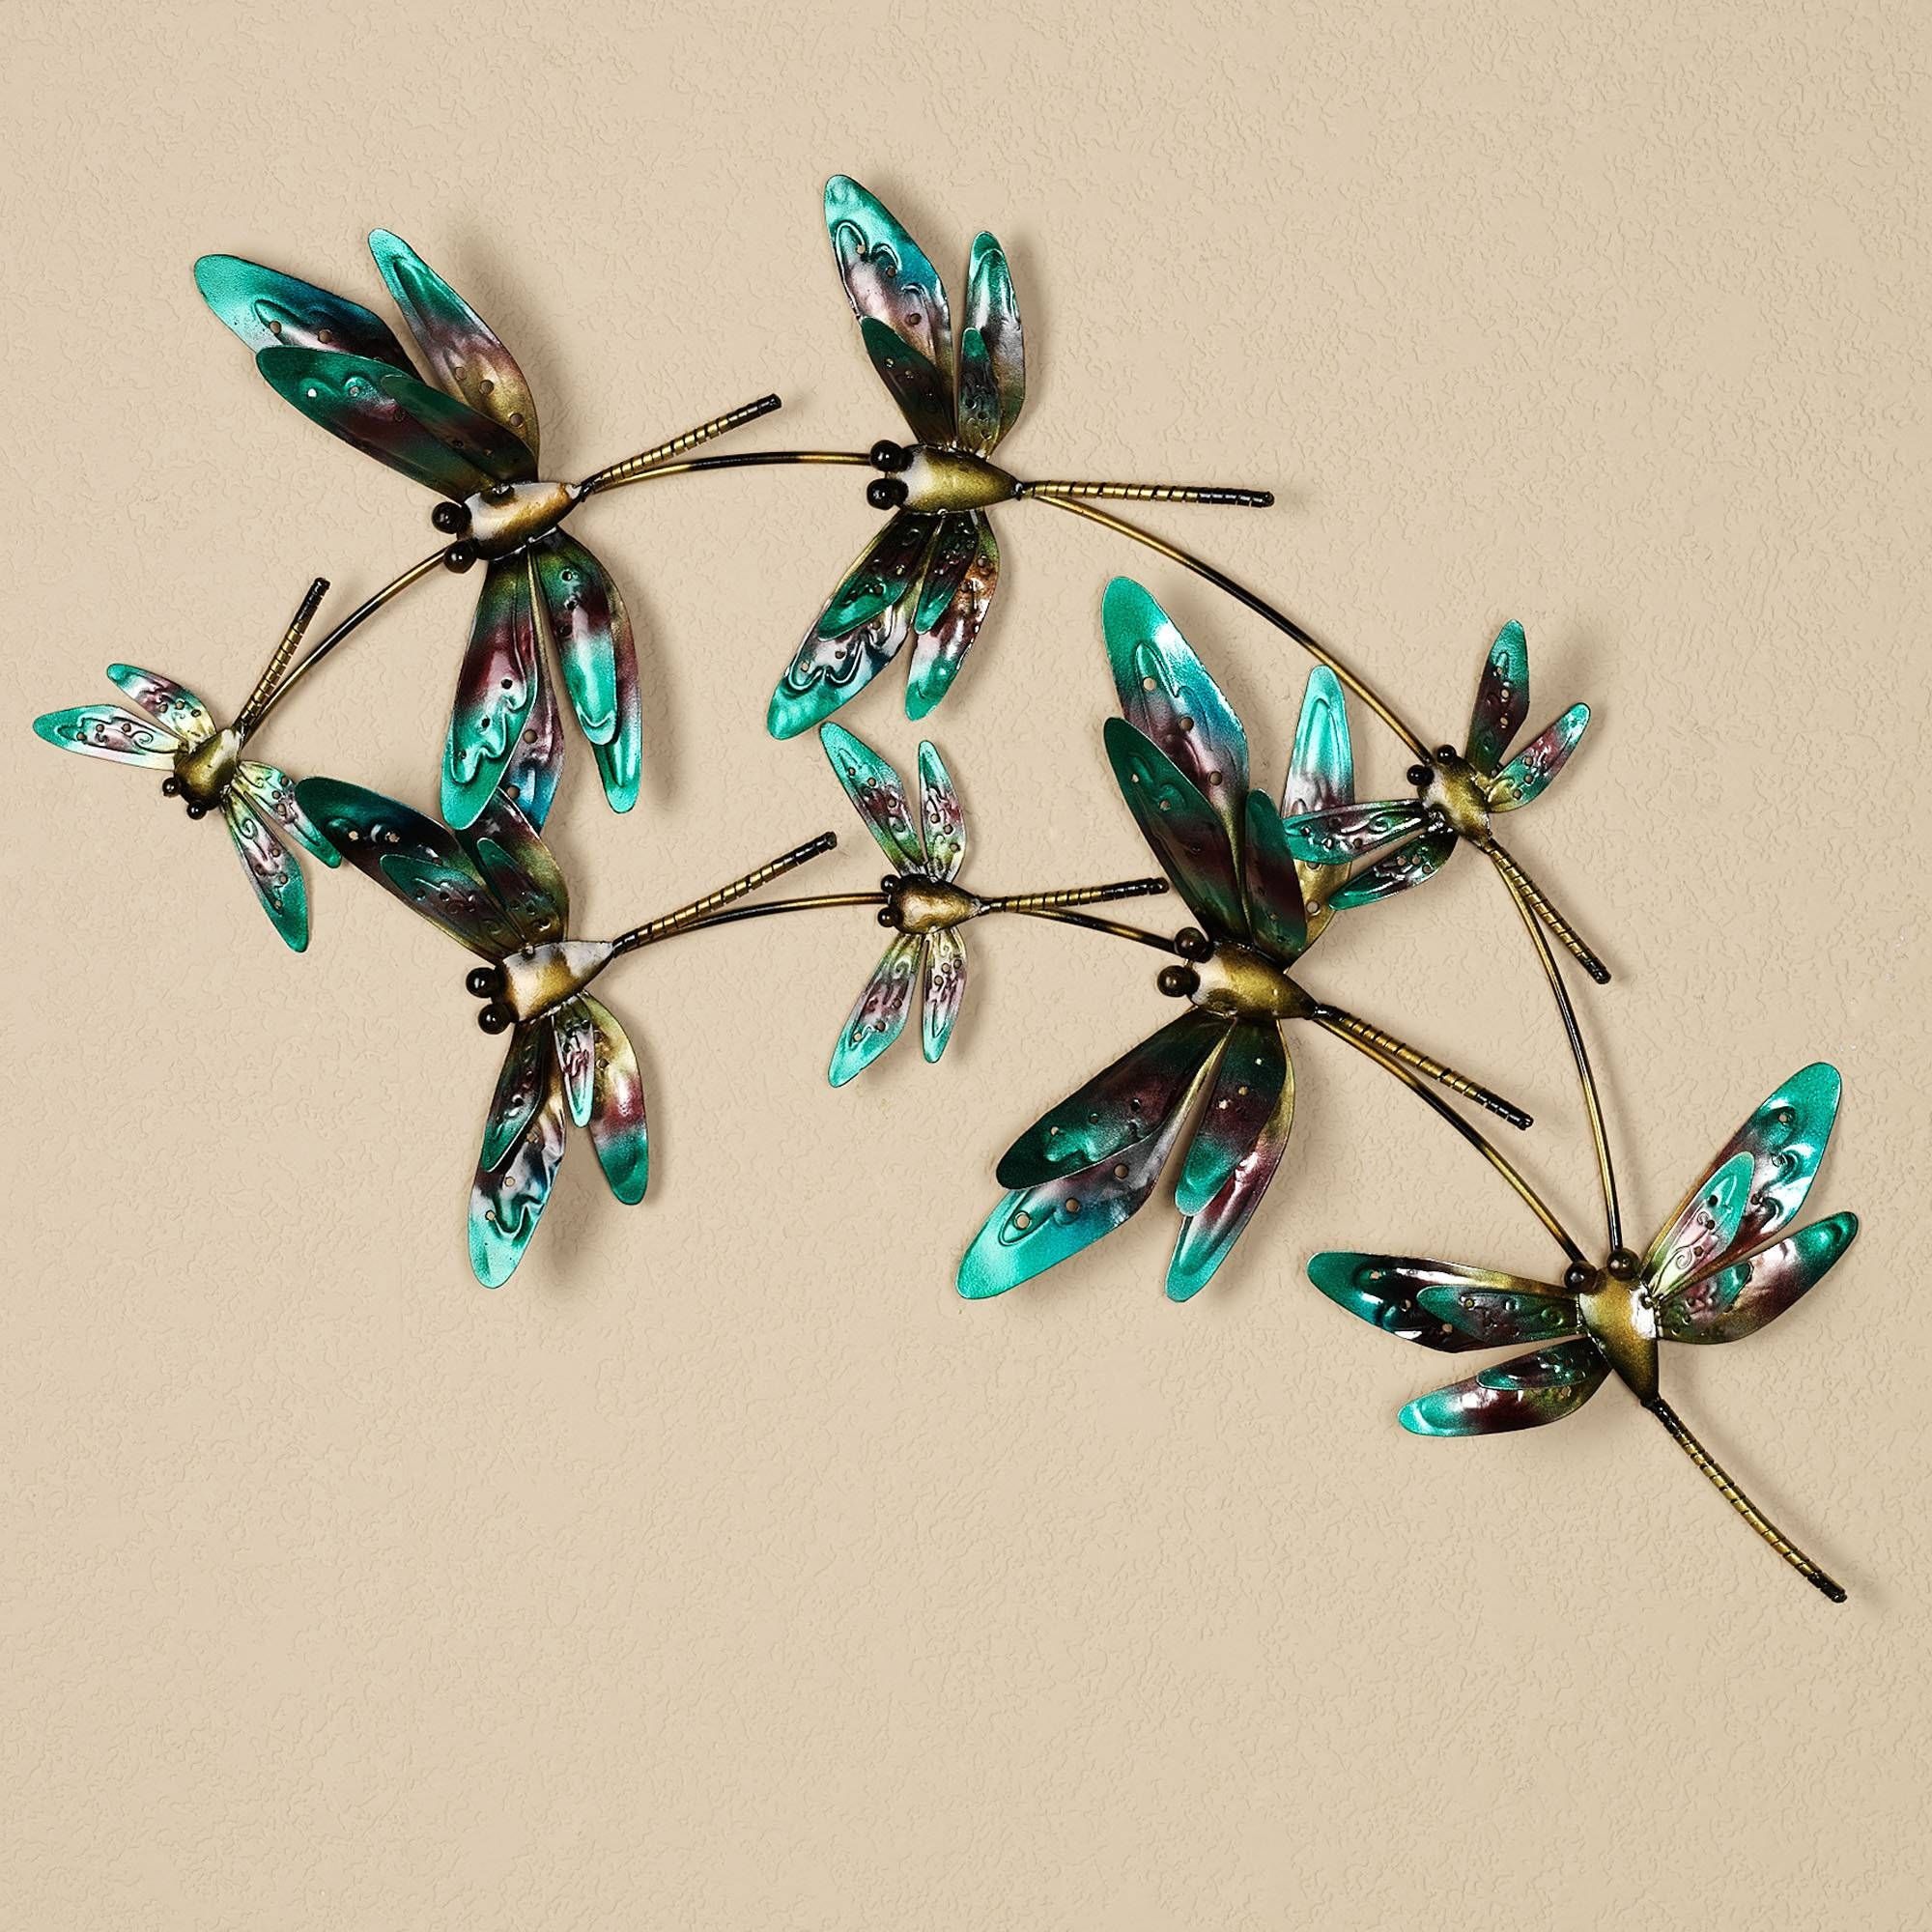 Wall Decor: Awesome Dragonflies Wall Decor Dragonfly Prints With Regard To Current Dragonfly Metal Wall Art (View 1 of 20)